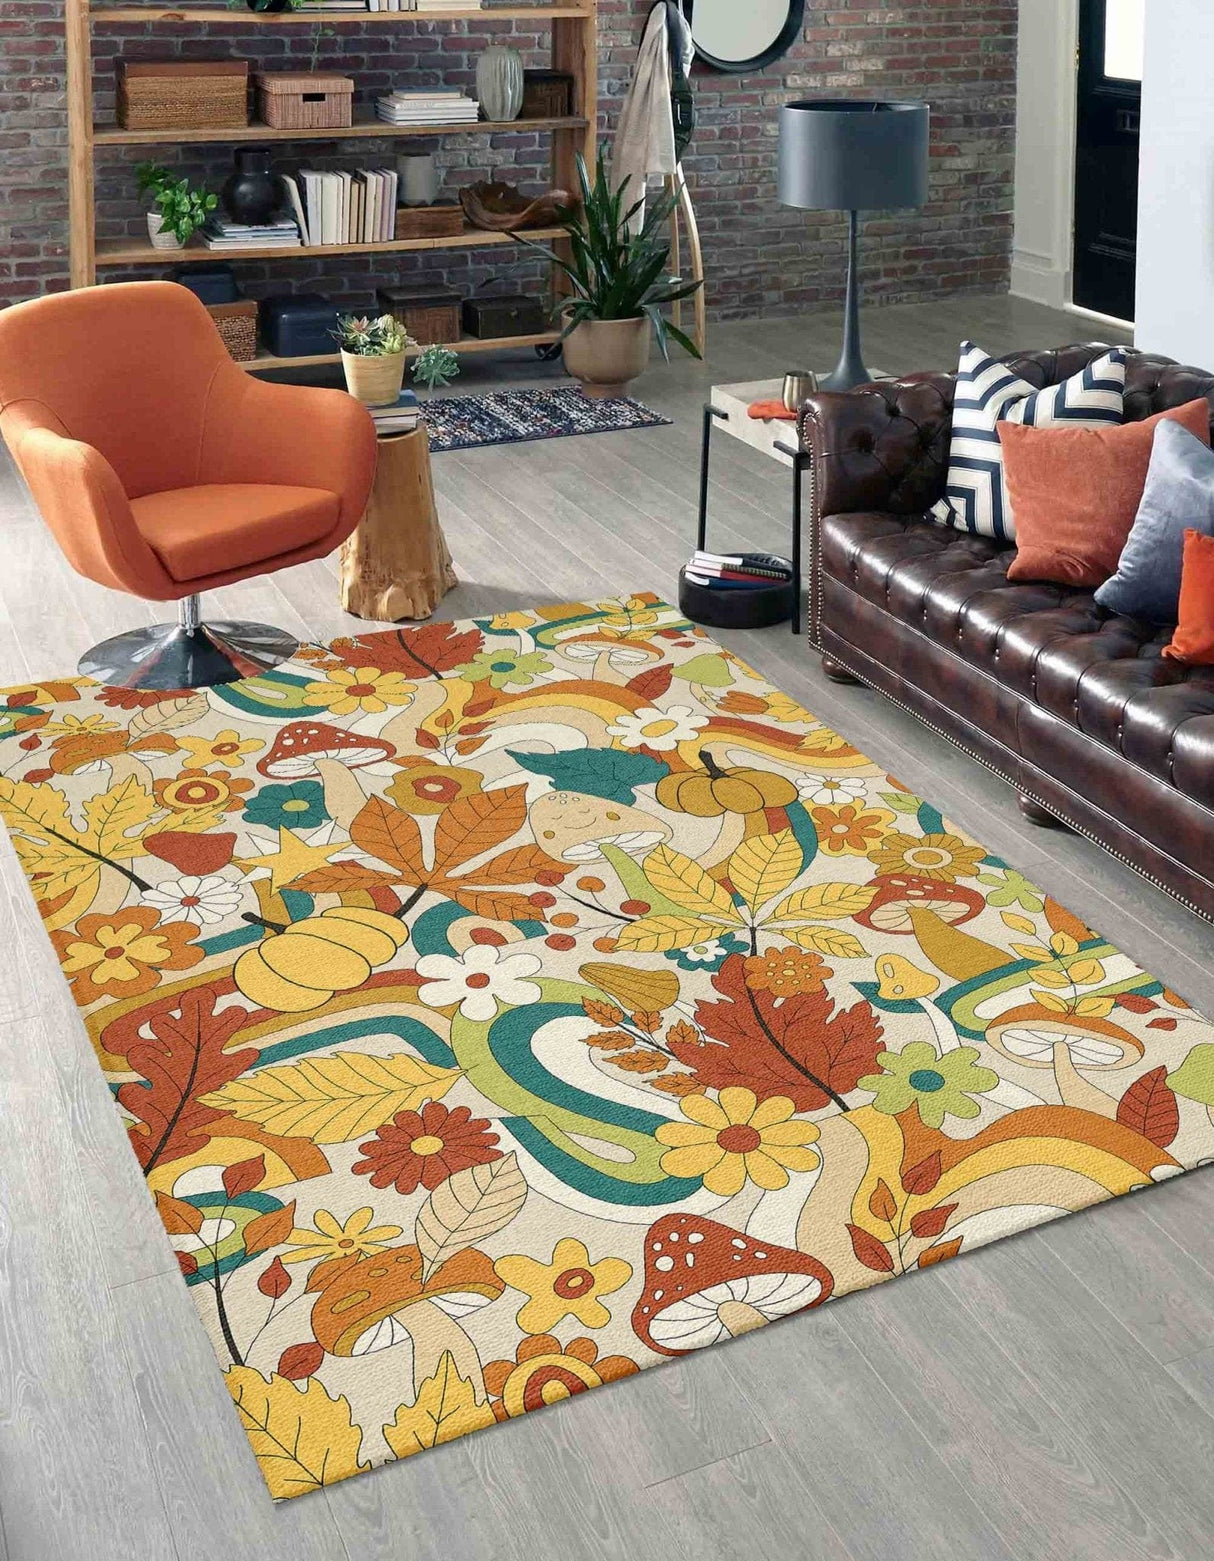 Mats & Rugs Personalized Mystic Boho Fall Floral Foliage Rug / Floormat | Personalized Home Carpet, Mat, Home Decor